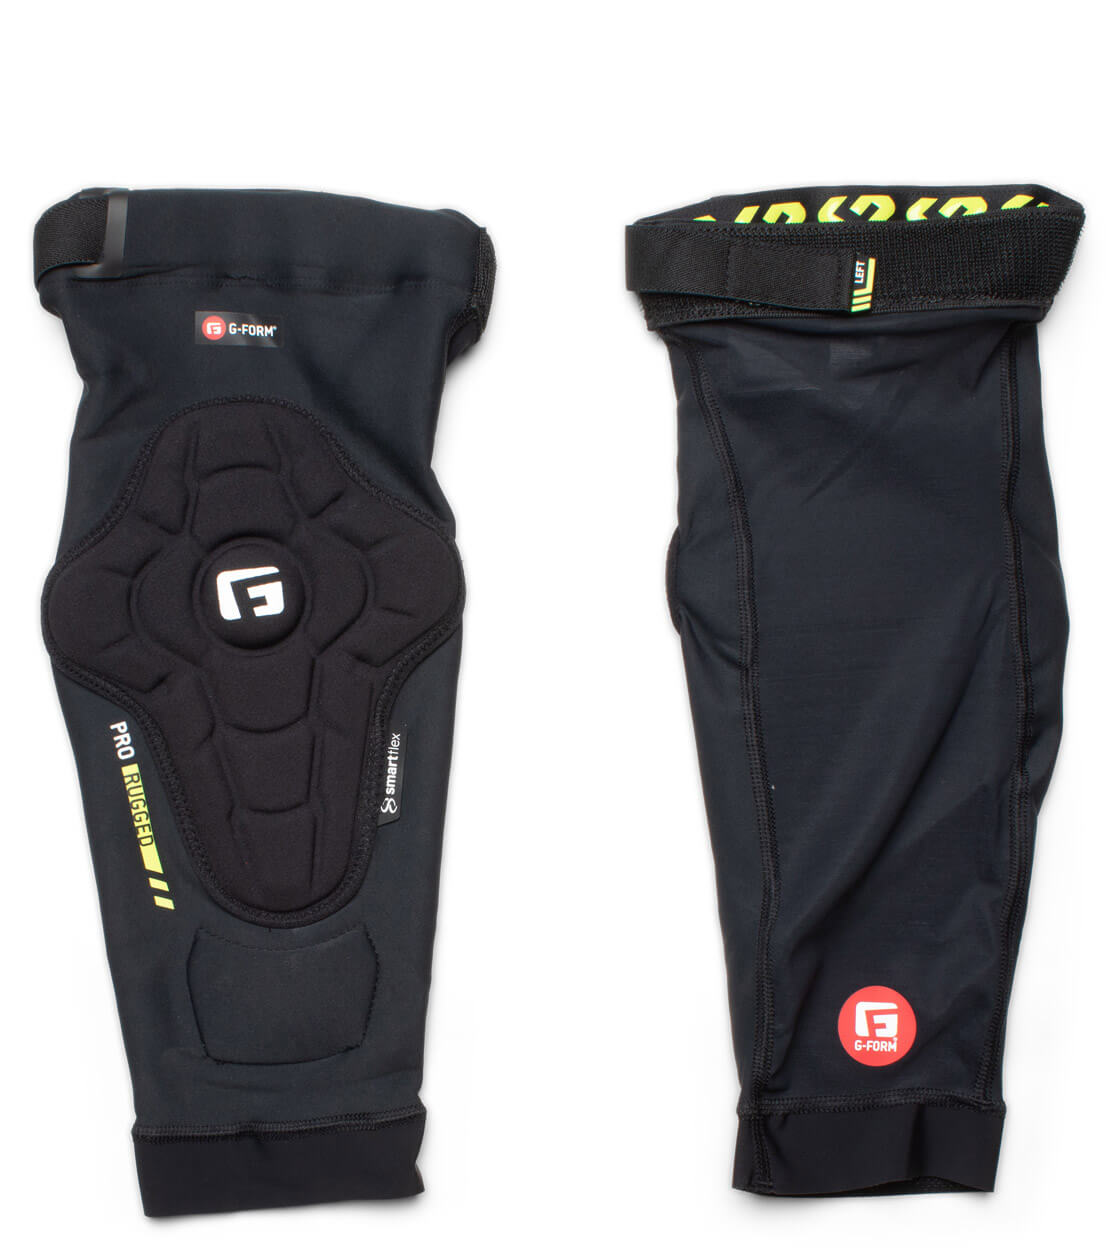 G-Form Knee Guard Pro-Rugged 2